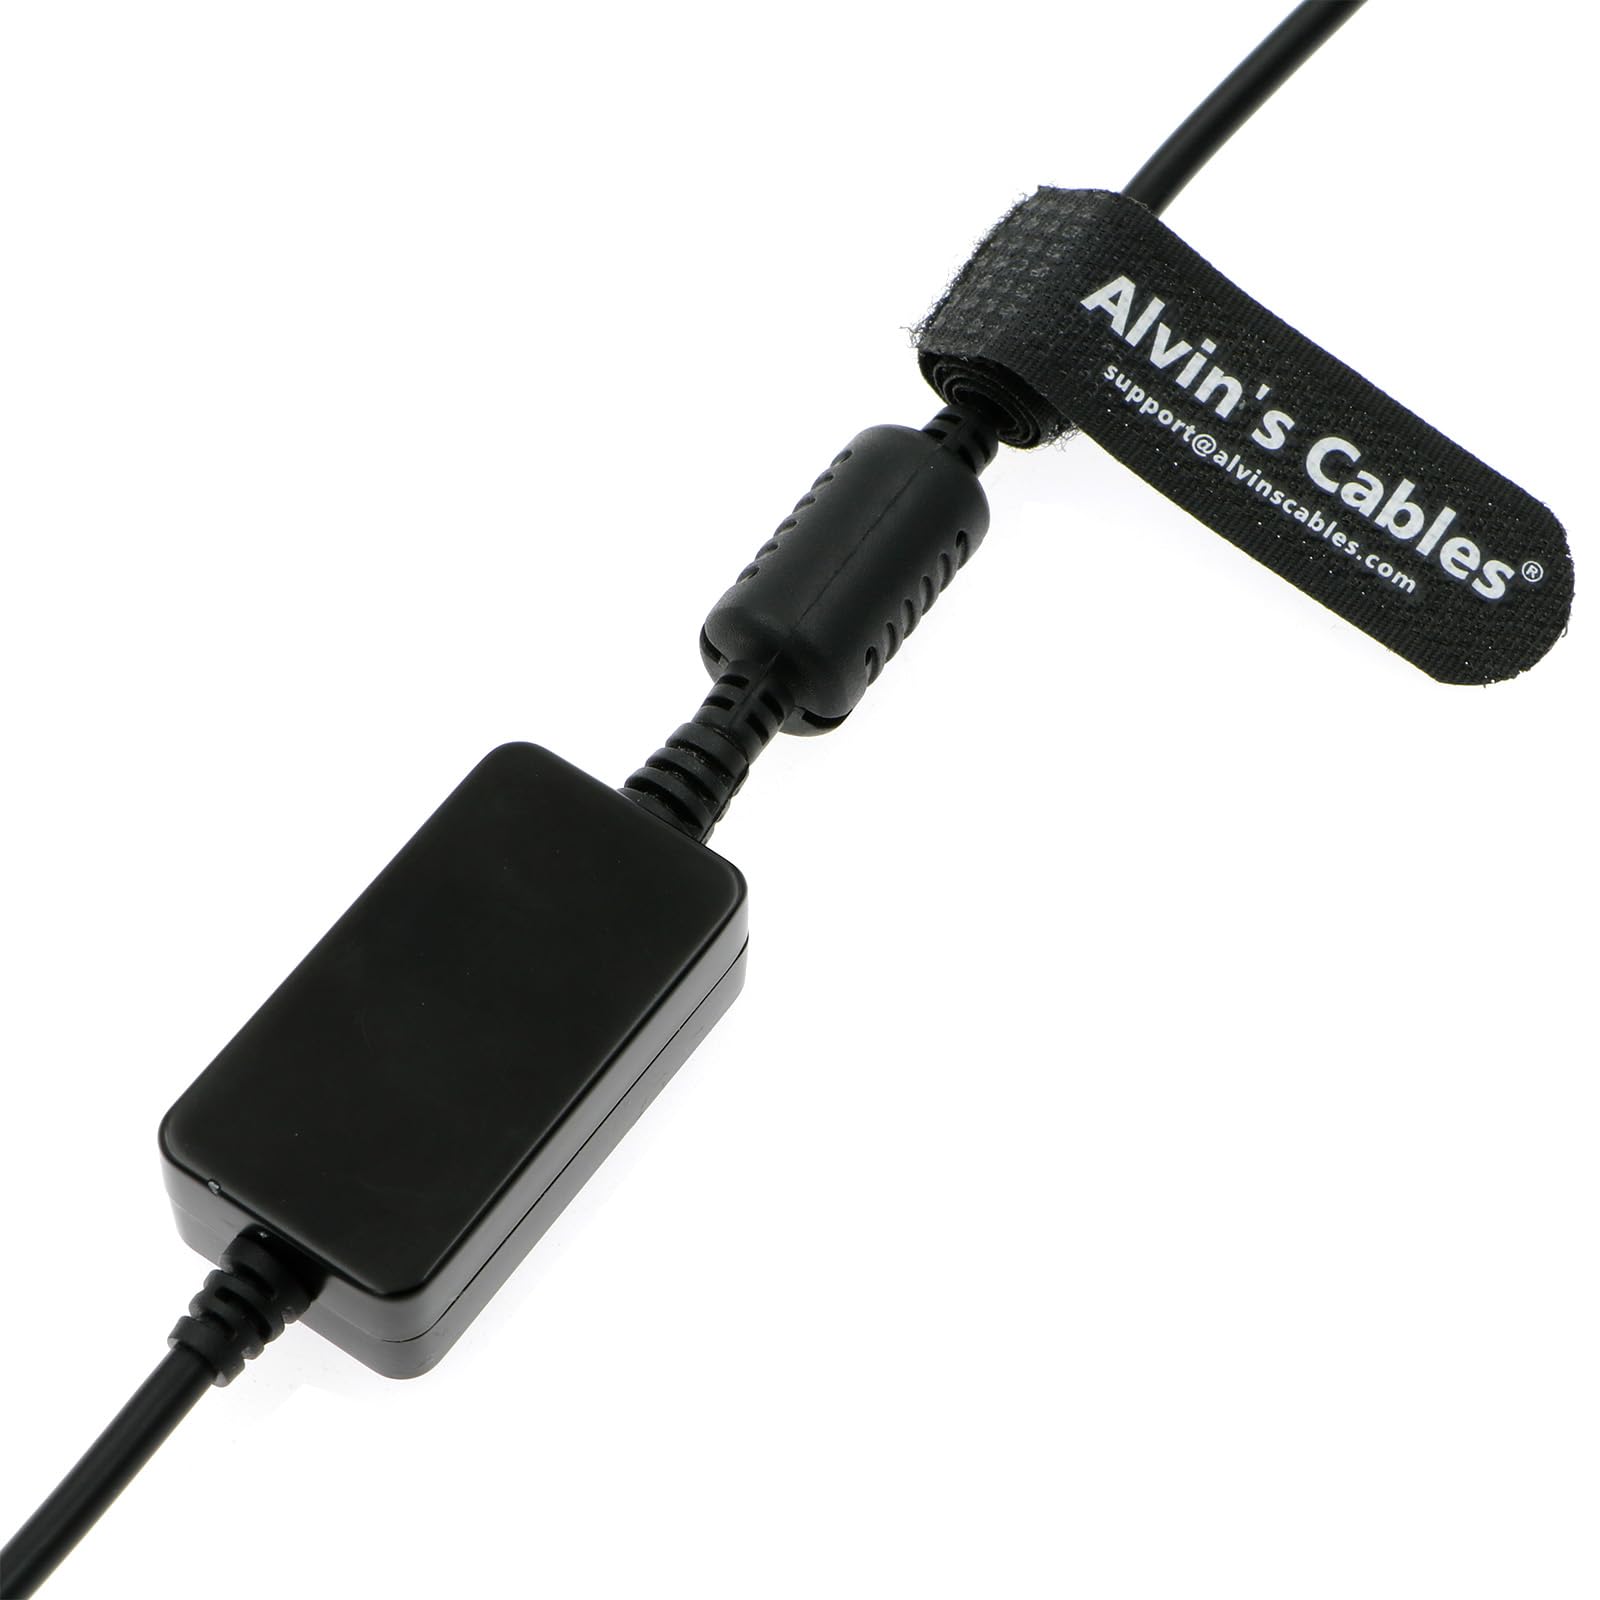 Alvin's Cables Power Cable for Sony FX6|FX9 from DJI Ronin 2 Gimbal Stabilizer 6 Pin Male to DC Right Angle 30CM| 12 inches